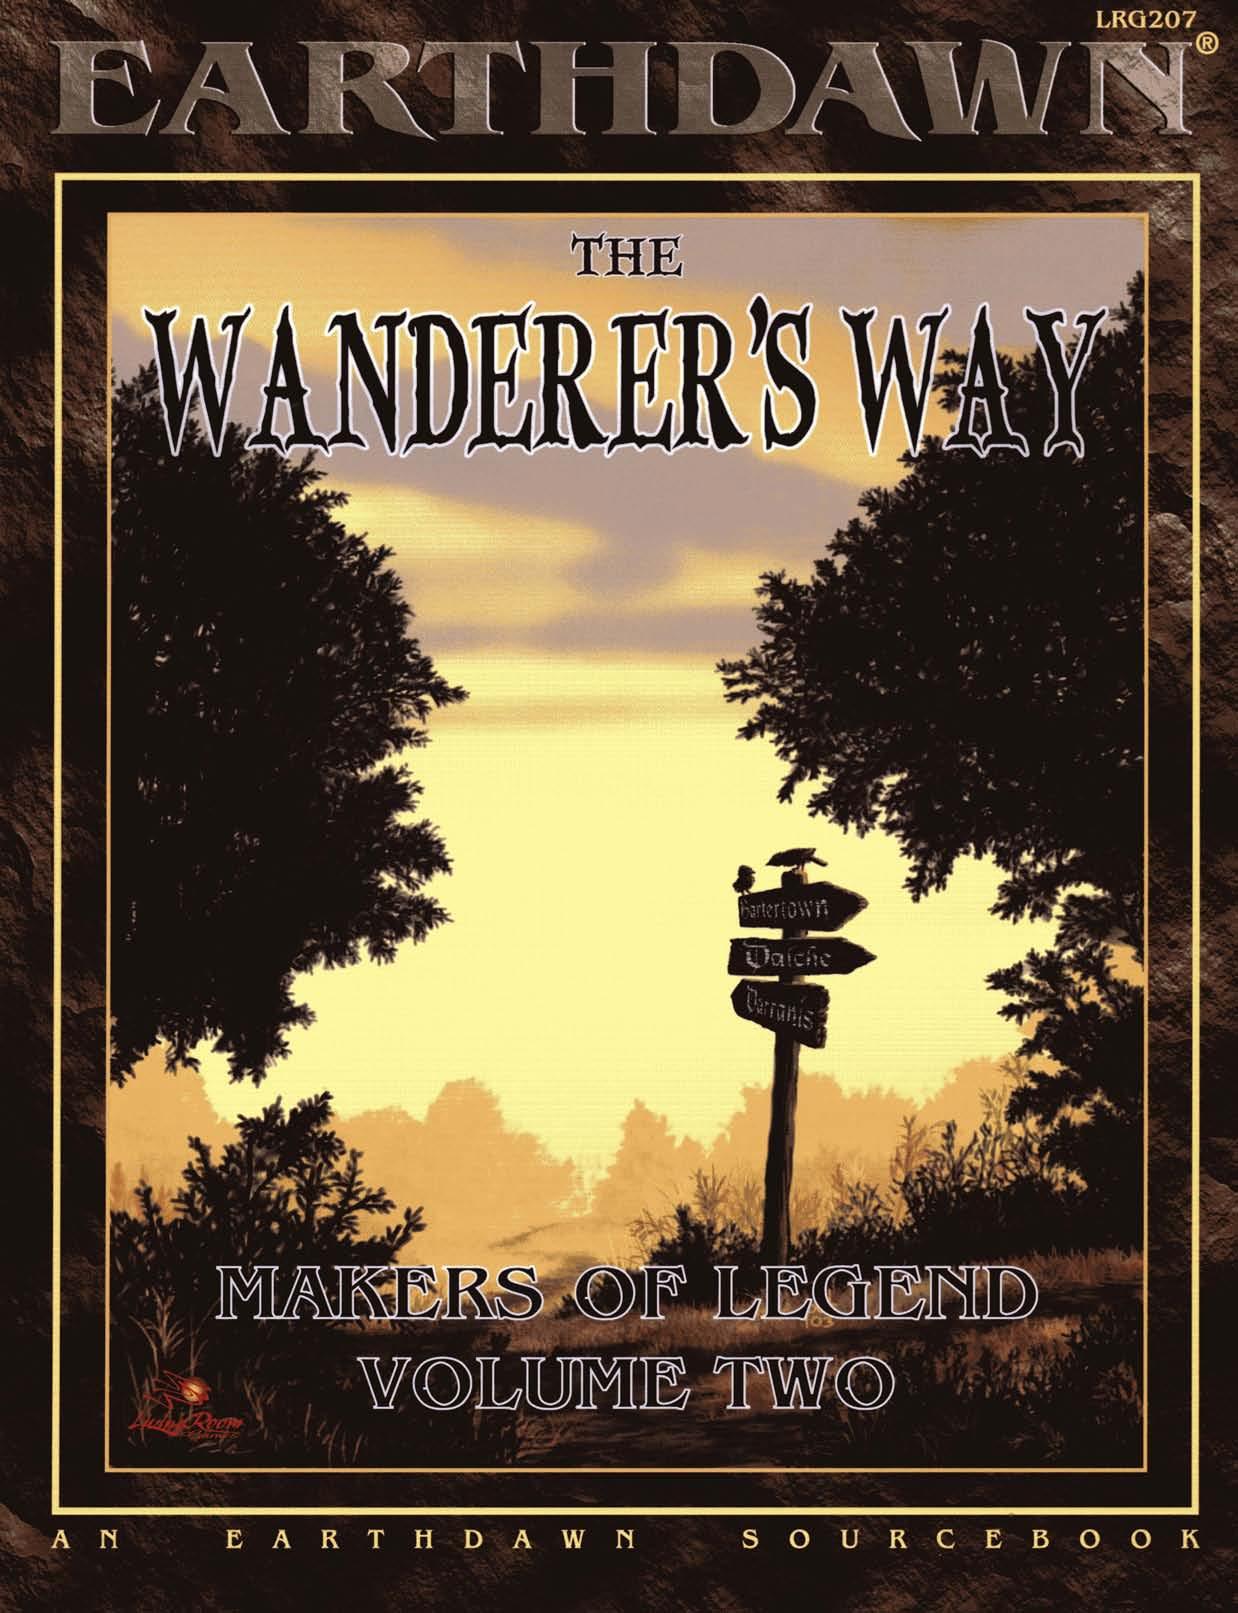 THE WANDERER'S WAY: MAKERS OF LEGEND VOLUME TWO